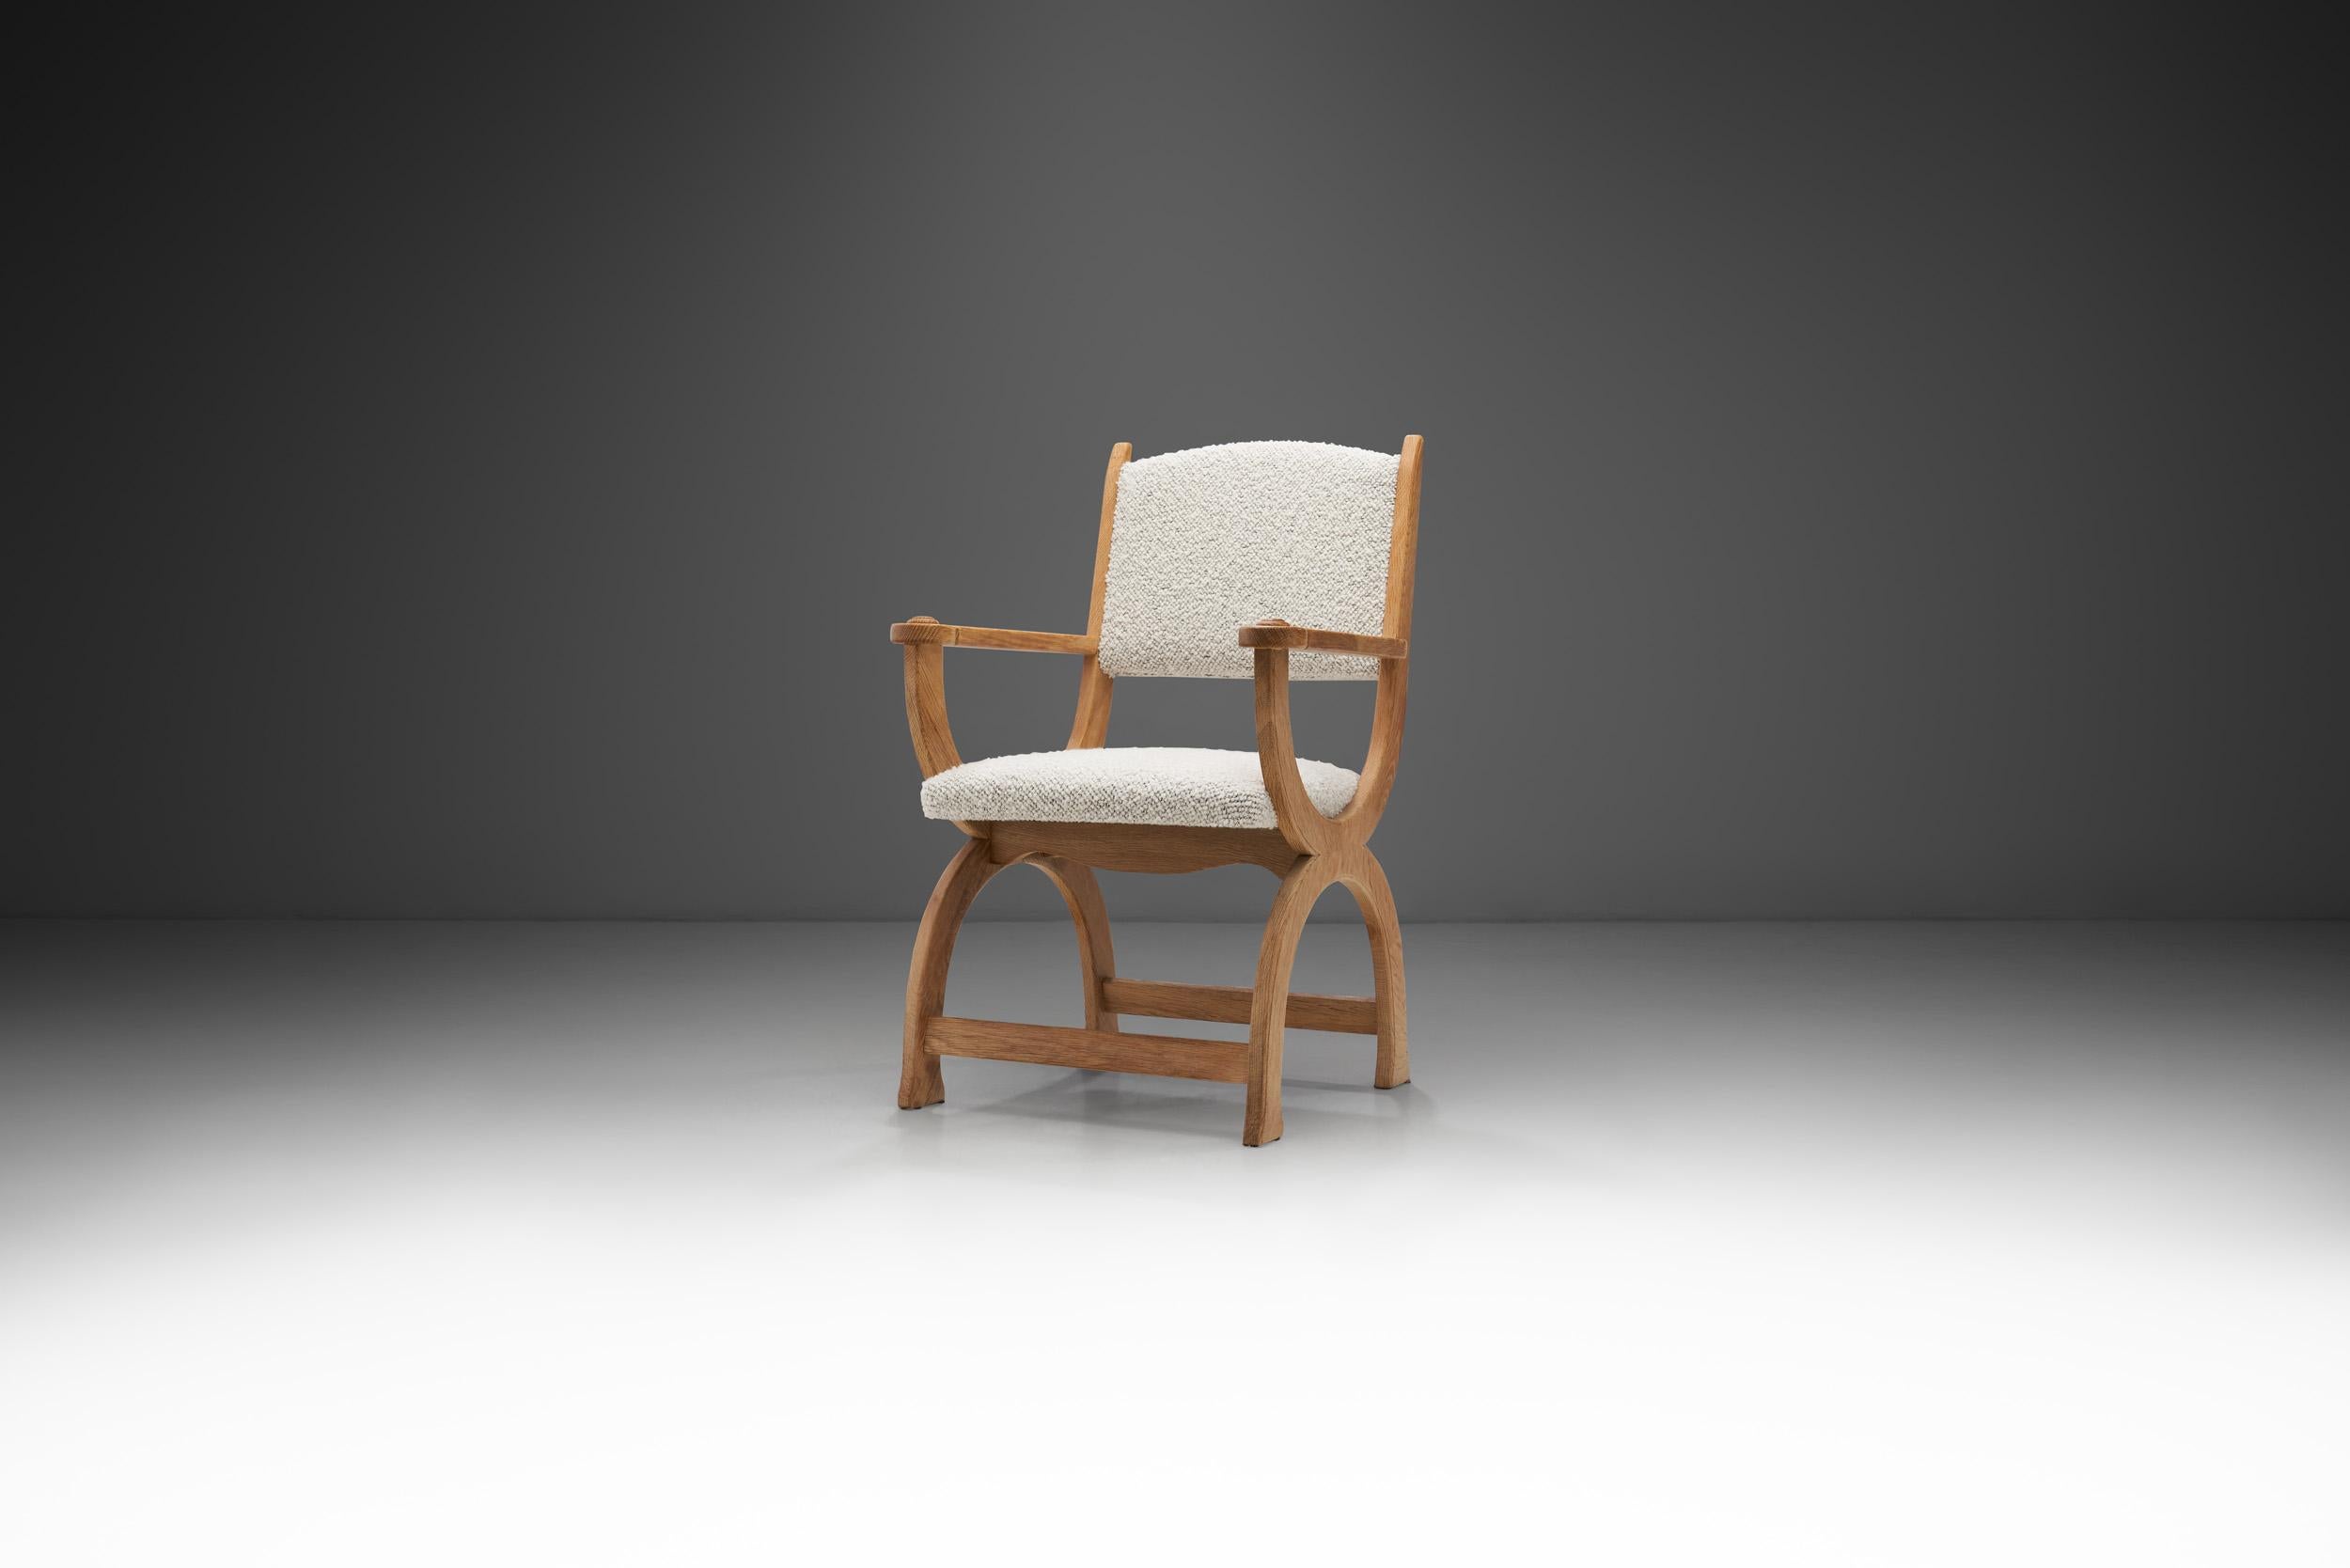 Designed by Henning Kjærnulf, this model is a version of the so-called “kurulstol” or kurul chair. The inspiration for this model is an ancient type of folding chair, originally a folding stool with straight or curved legs. Among the Romans, in